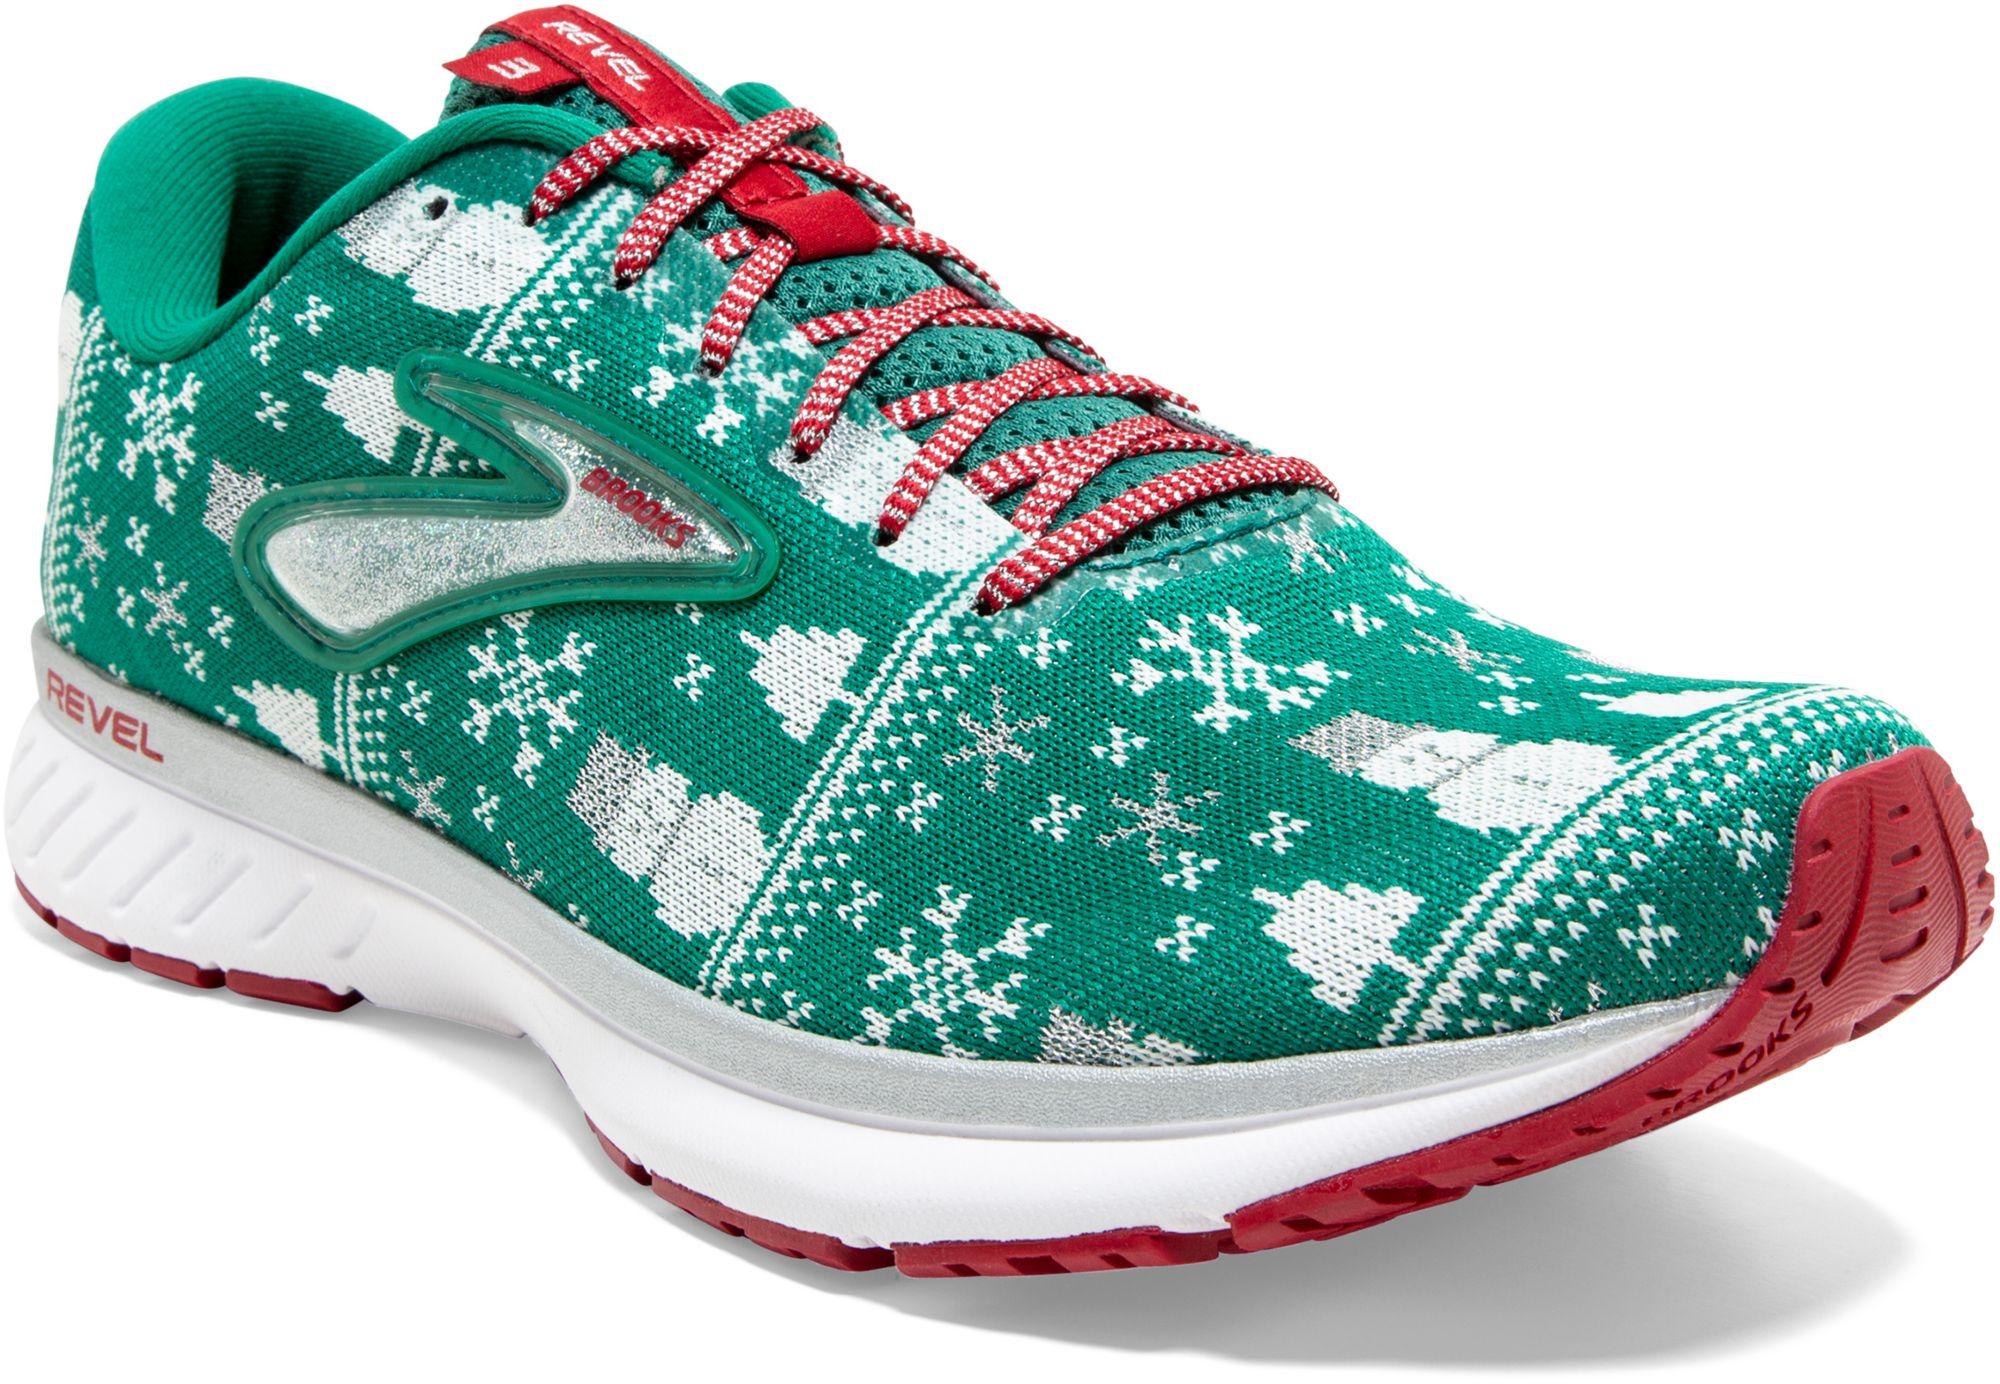 Brooks Revel 3 Run Merry Running Shoes in Green/Red (Green) - Lyst